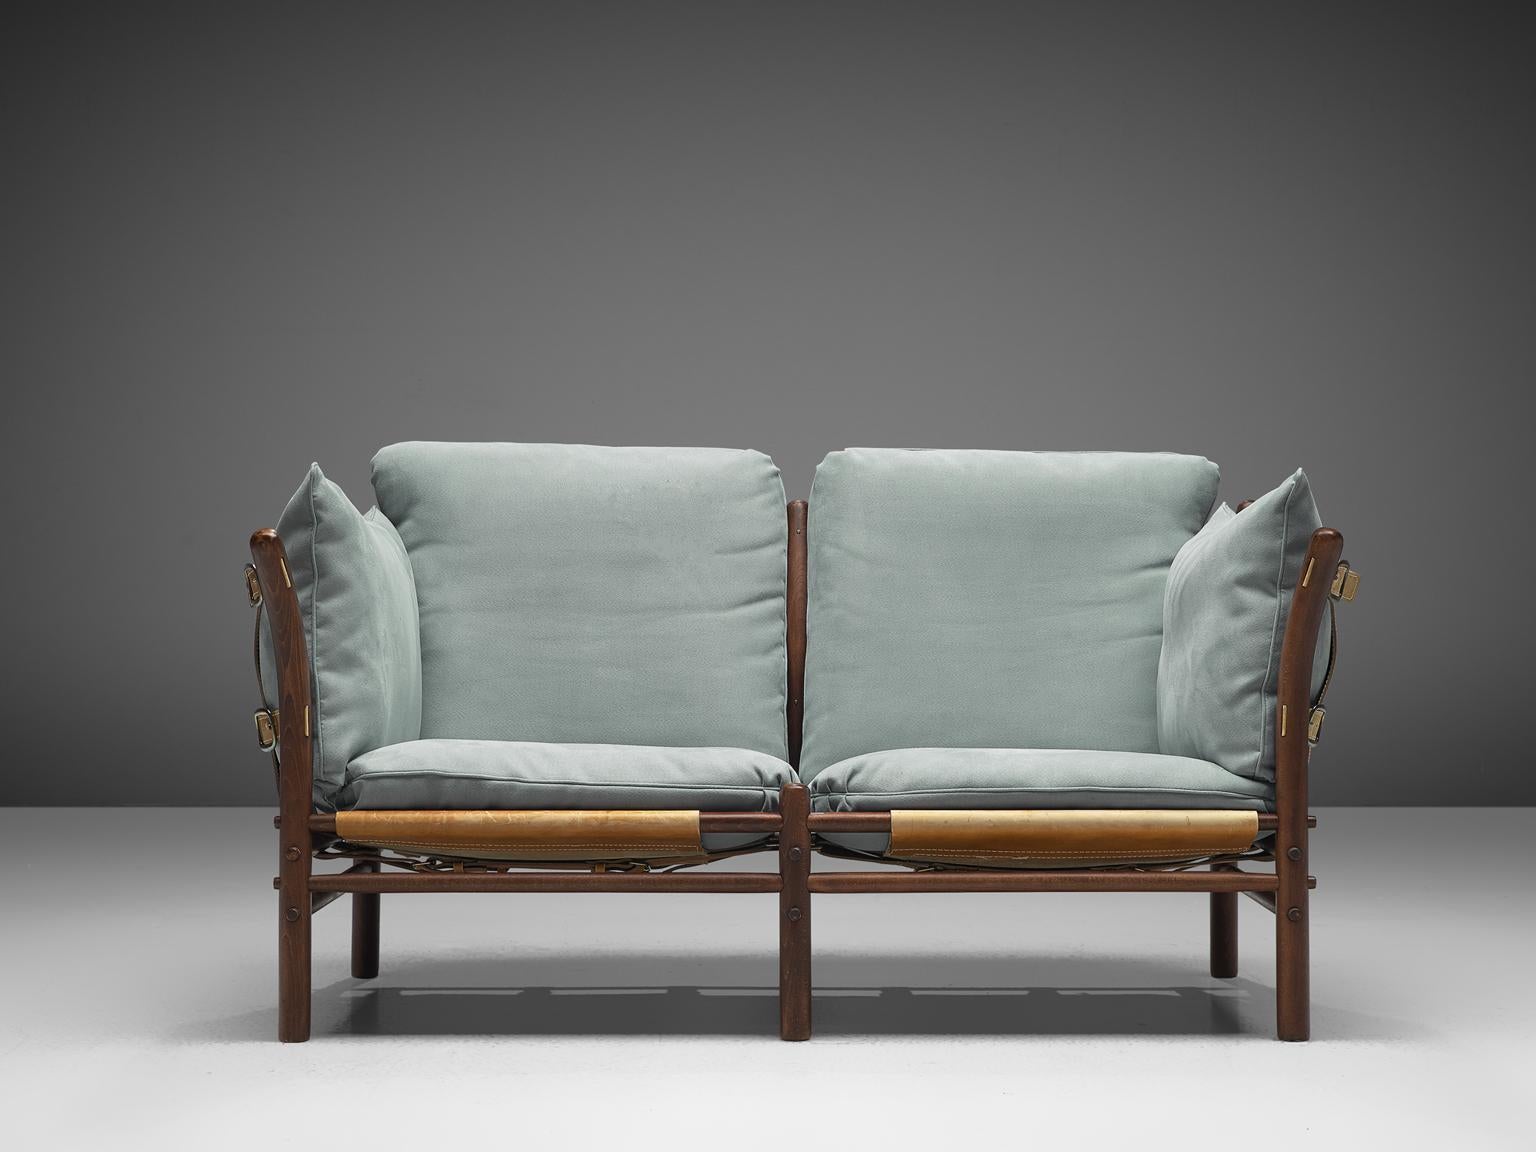 Arne Norell for Norell Möbel, two-seat 'Ilona' sofa, buffalo leather, fabric and beech, Sweden, 1970s.

Swedish two-seat sofa designed by Arne Norell in the 1970s. The wooden frame in stained beech is characterized by the circular diameters of the